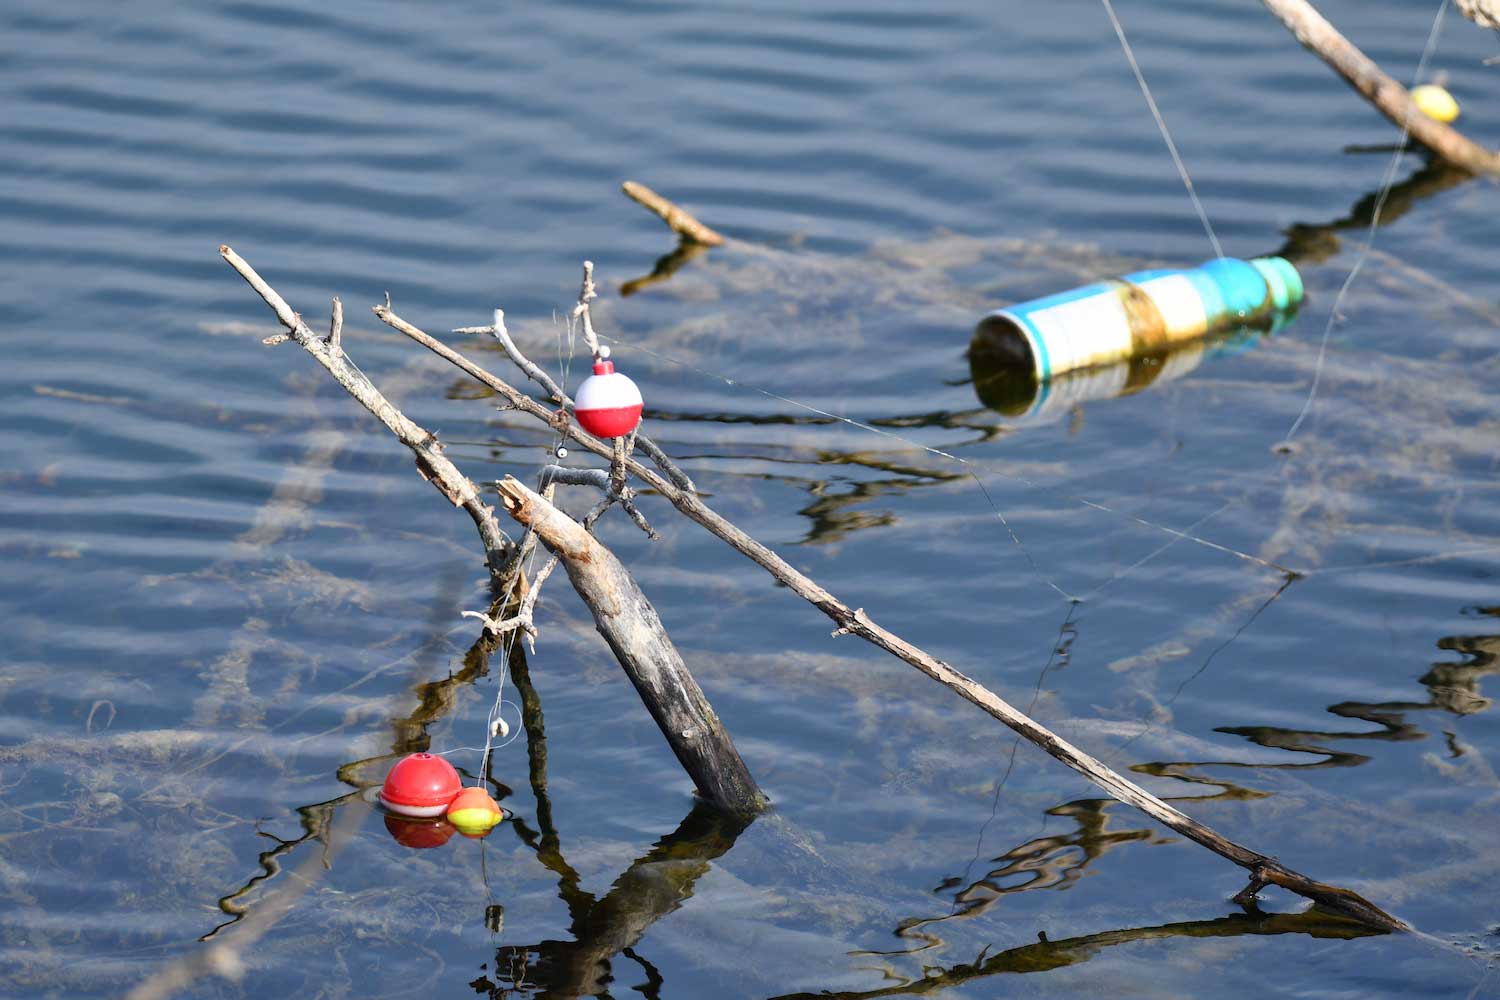 Bobbers and fishing line stuck in branches in the water with a plastic bottle floating behind it. 